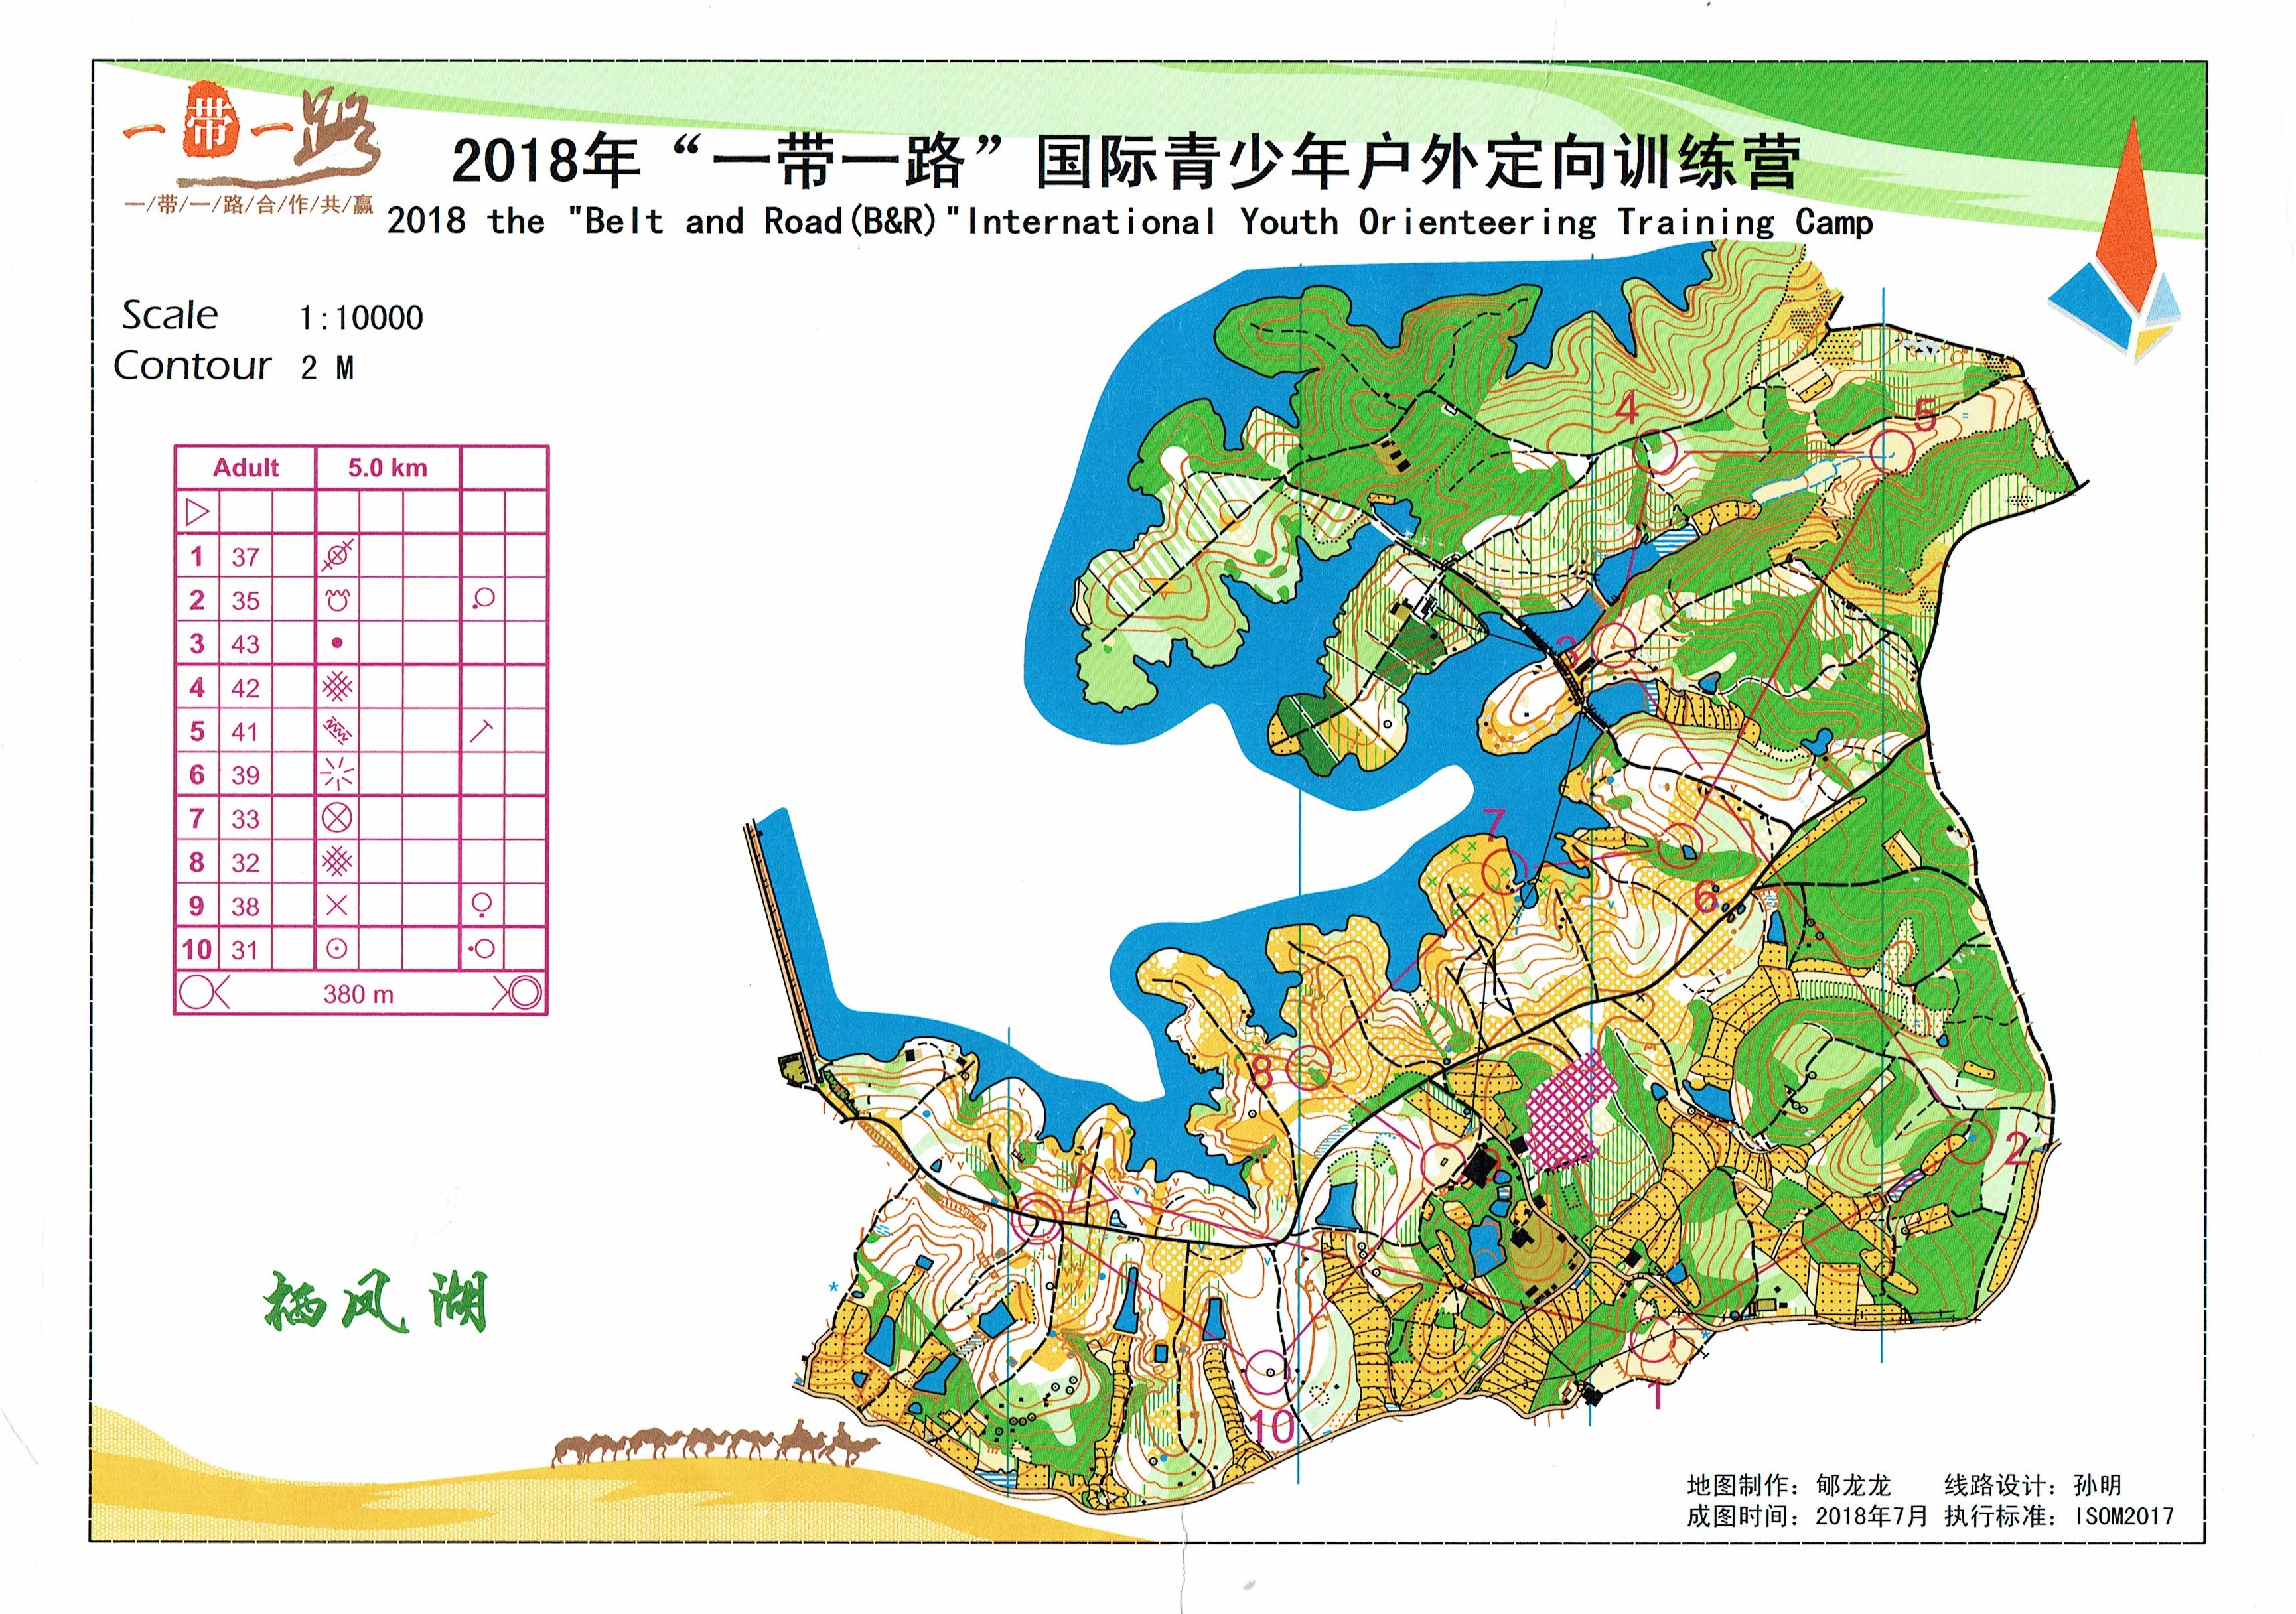 Belt and Road International Youth Orienteering Camp (26/10/2018)